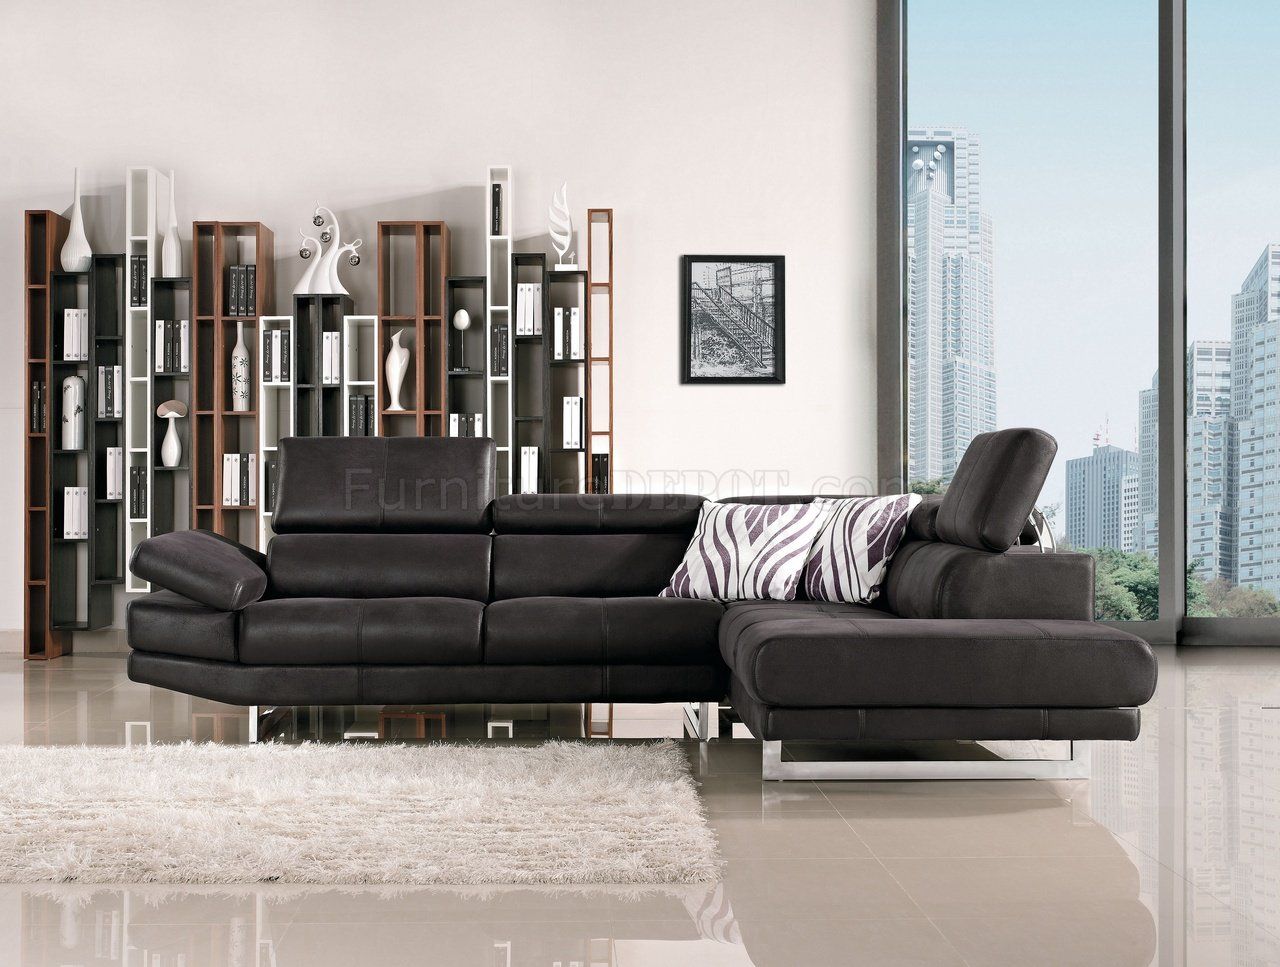 Black Fabric Modern Sectional Sofa W/Adjustable Headrest Regarding Wynne Contemporary Sectional Sofas Black (View 4 of 15)